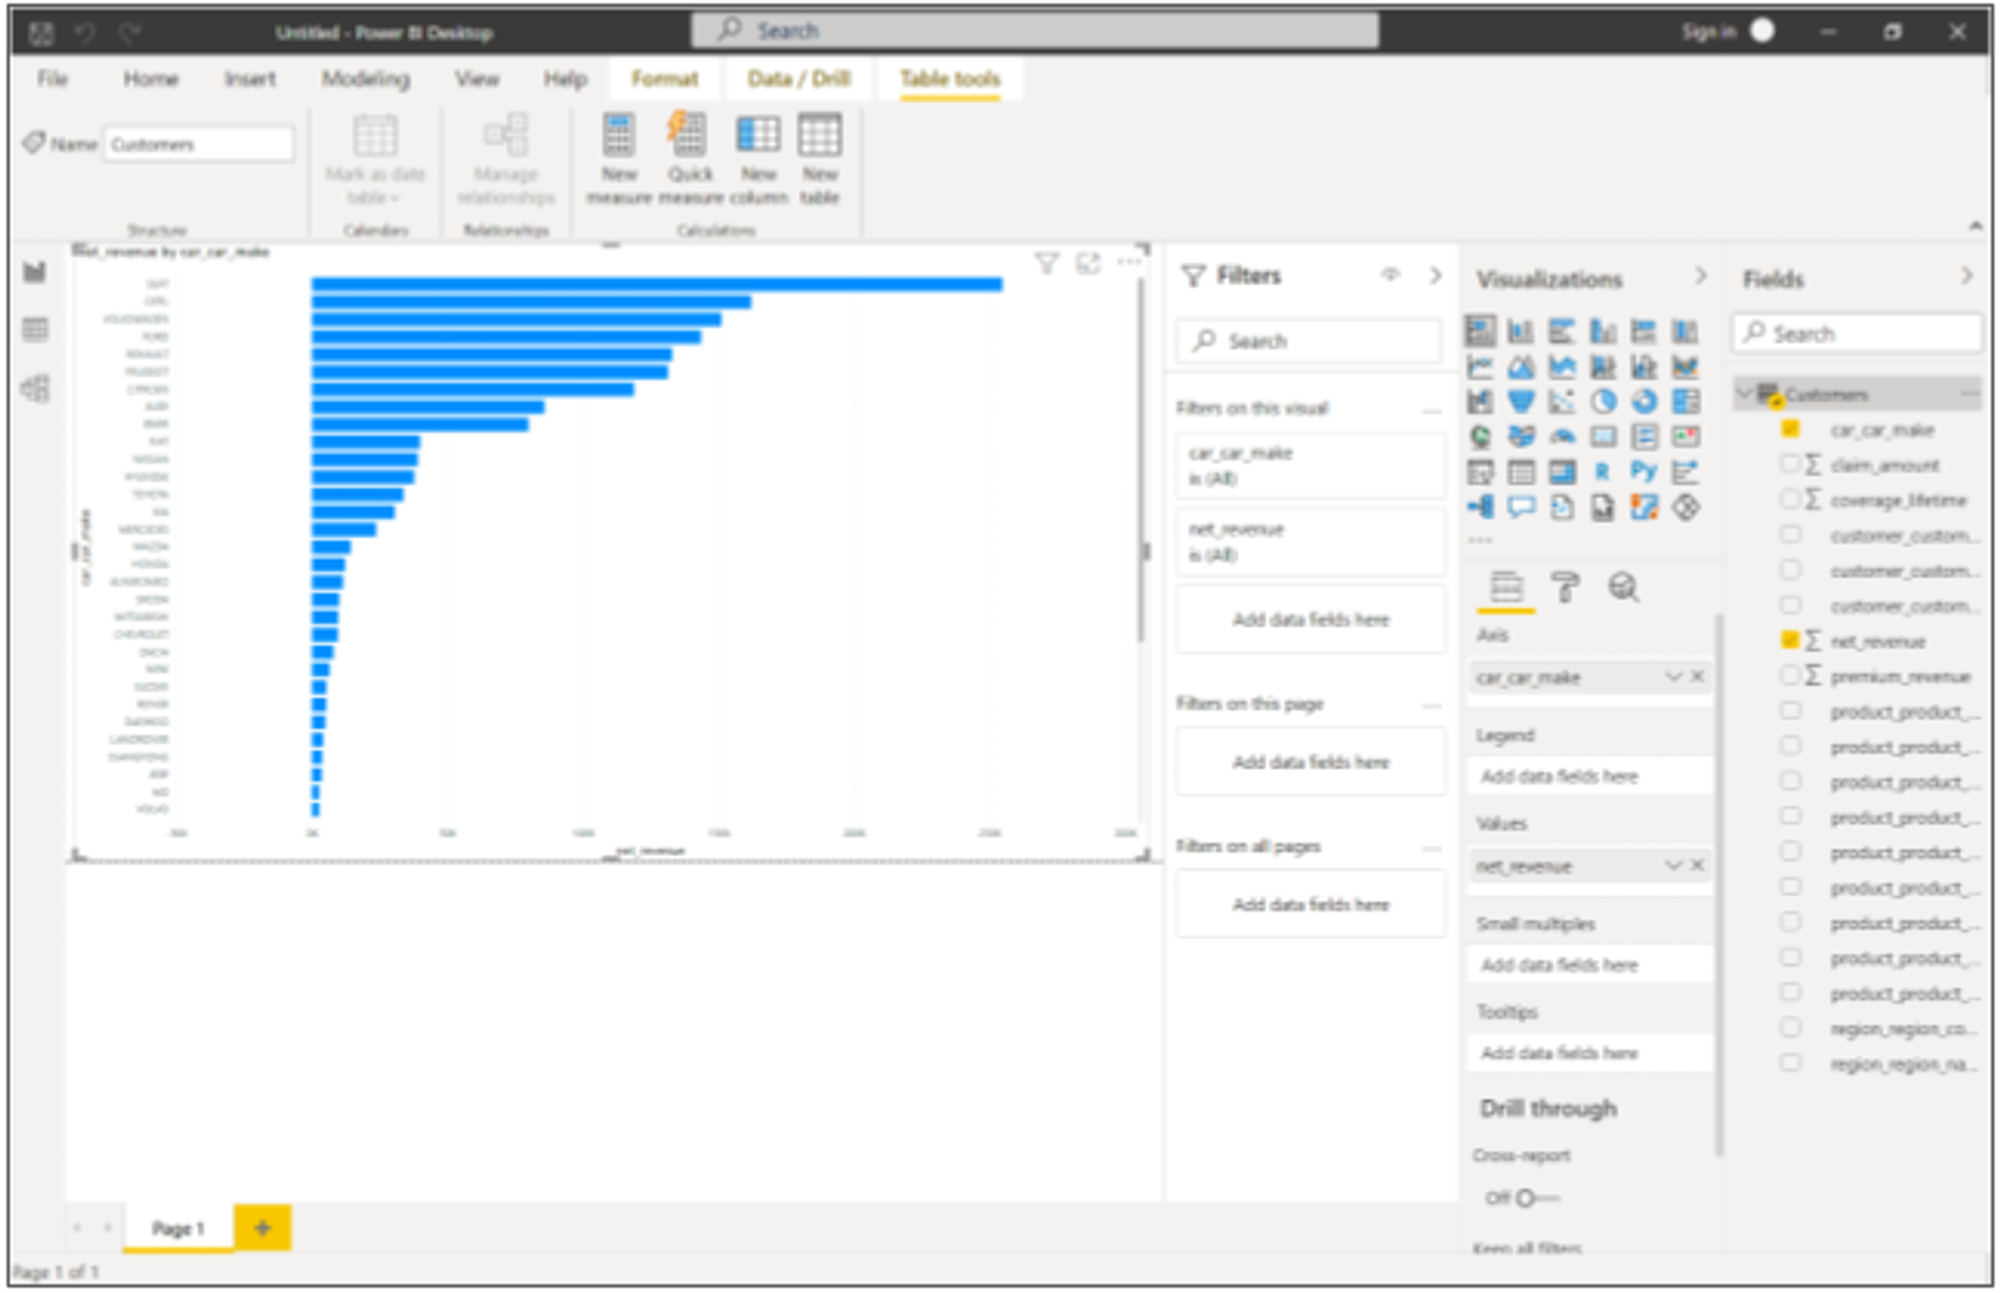 Power BI connected to the GoodData semantic model